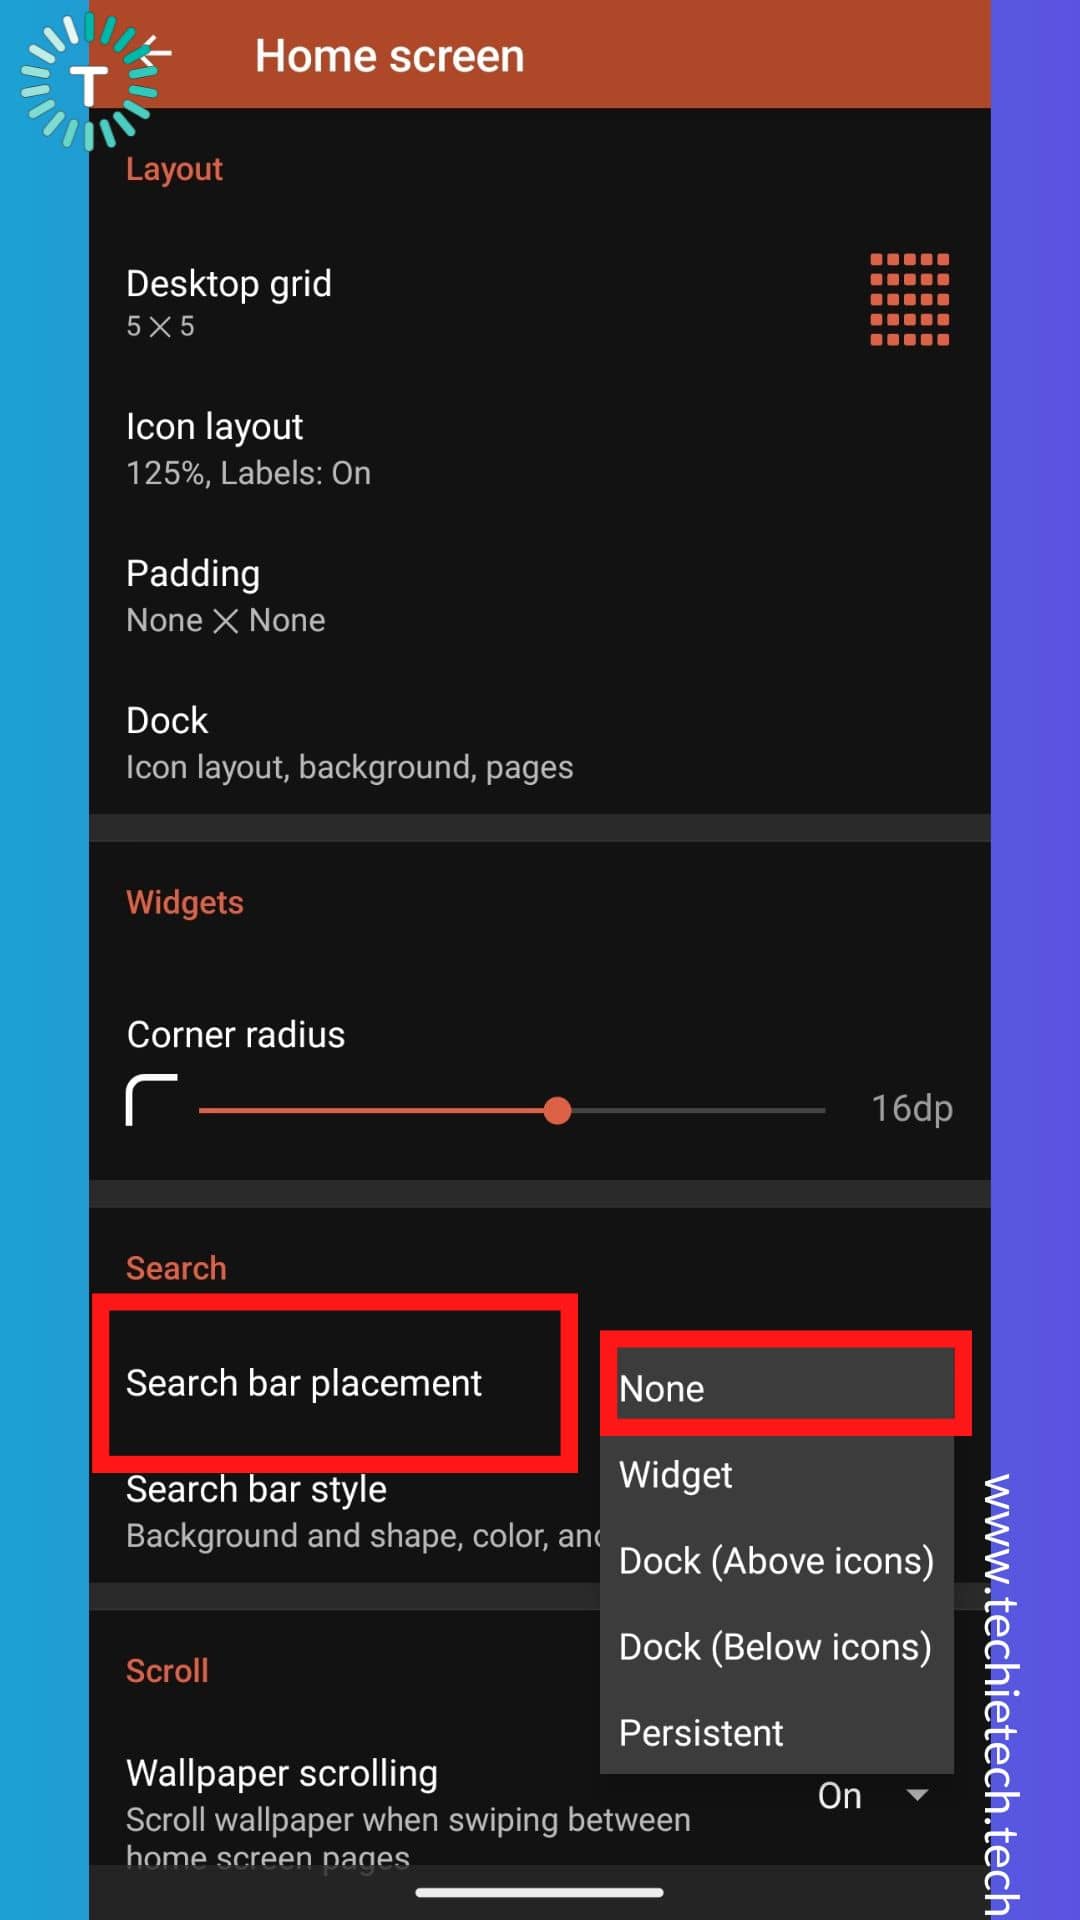 Tap on the Search bar placement option and select 'None'